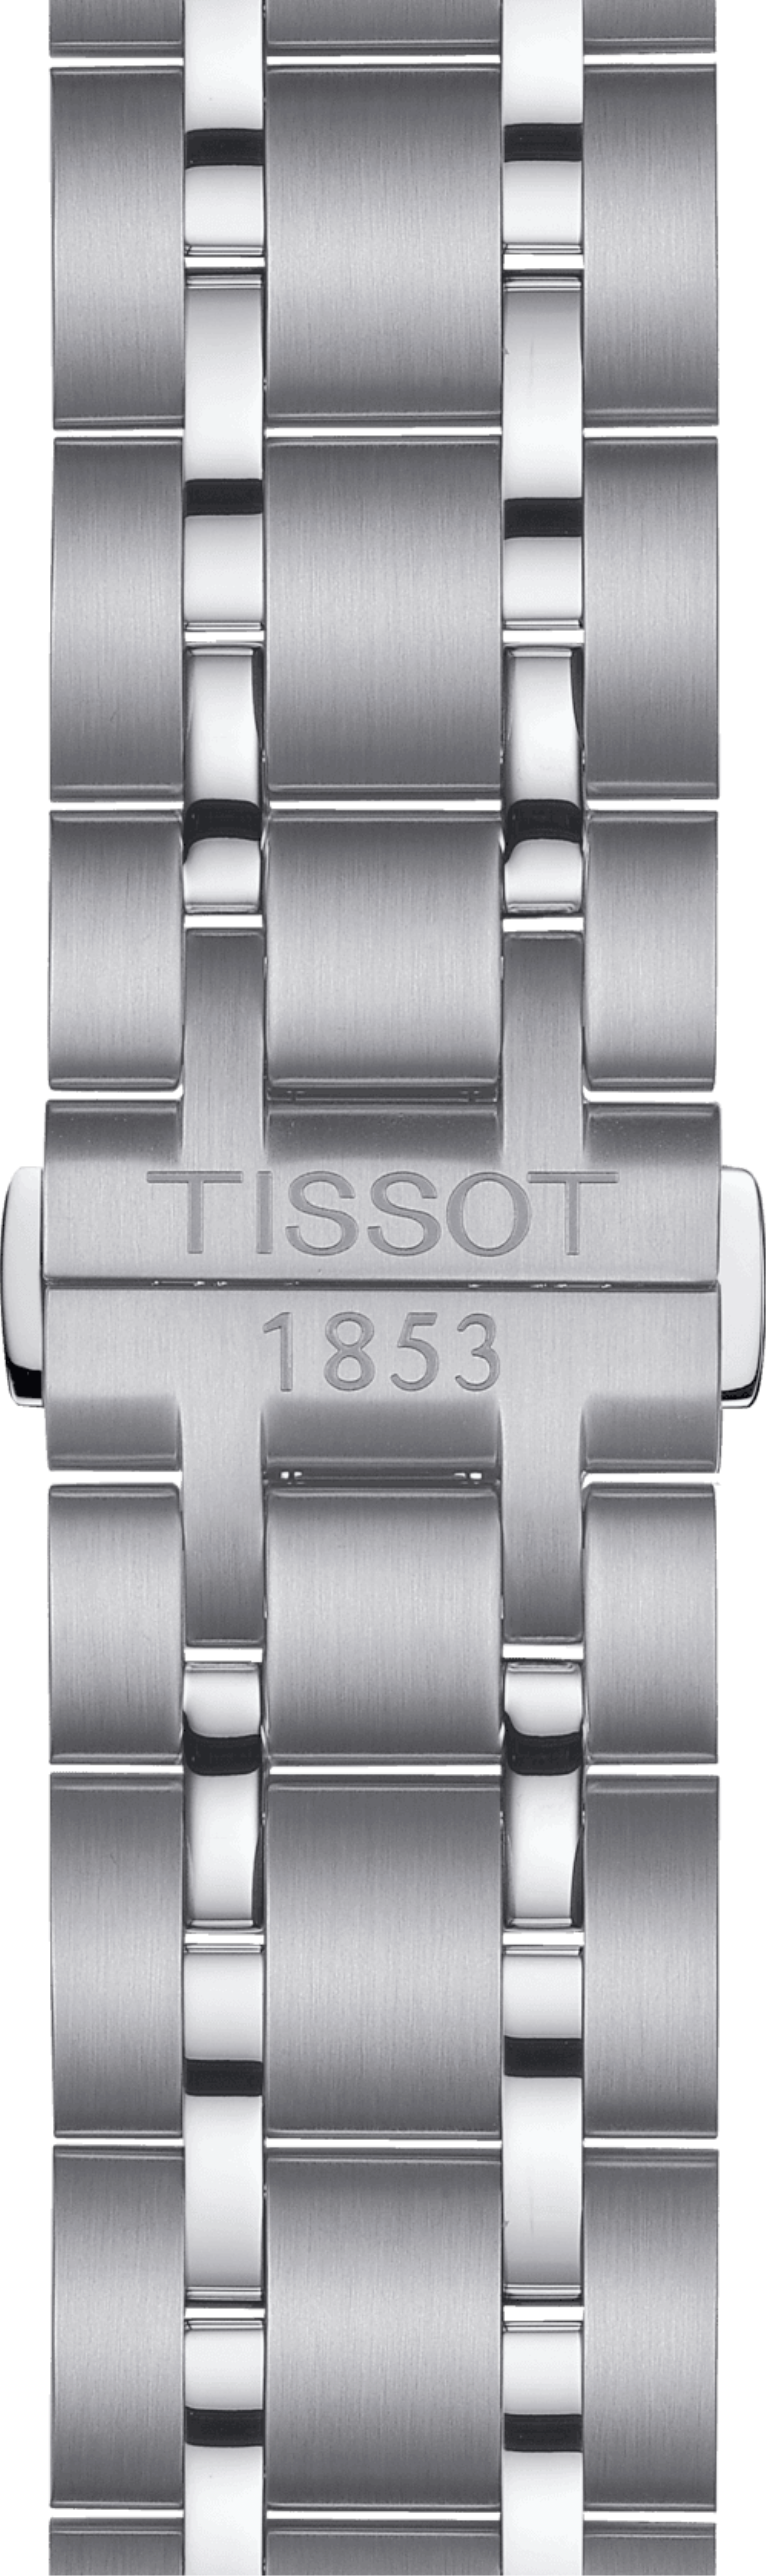 Tissot T Classic Couturier Chronograph White Stainless Steel Quartz Watch For Men - T101.617.11.031.00